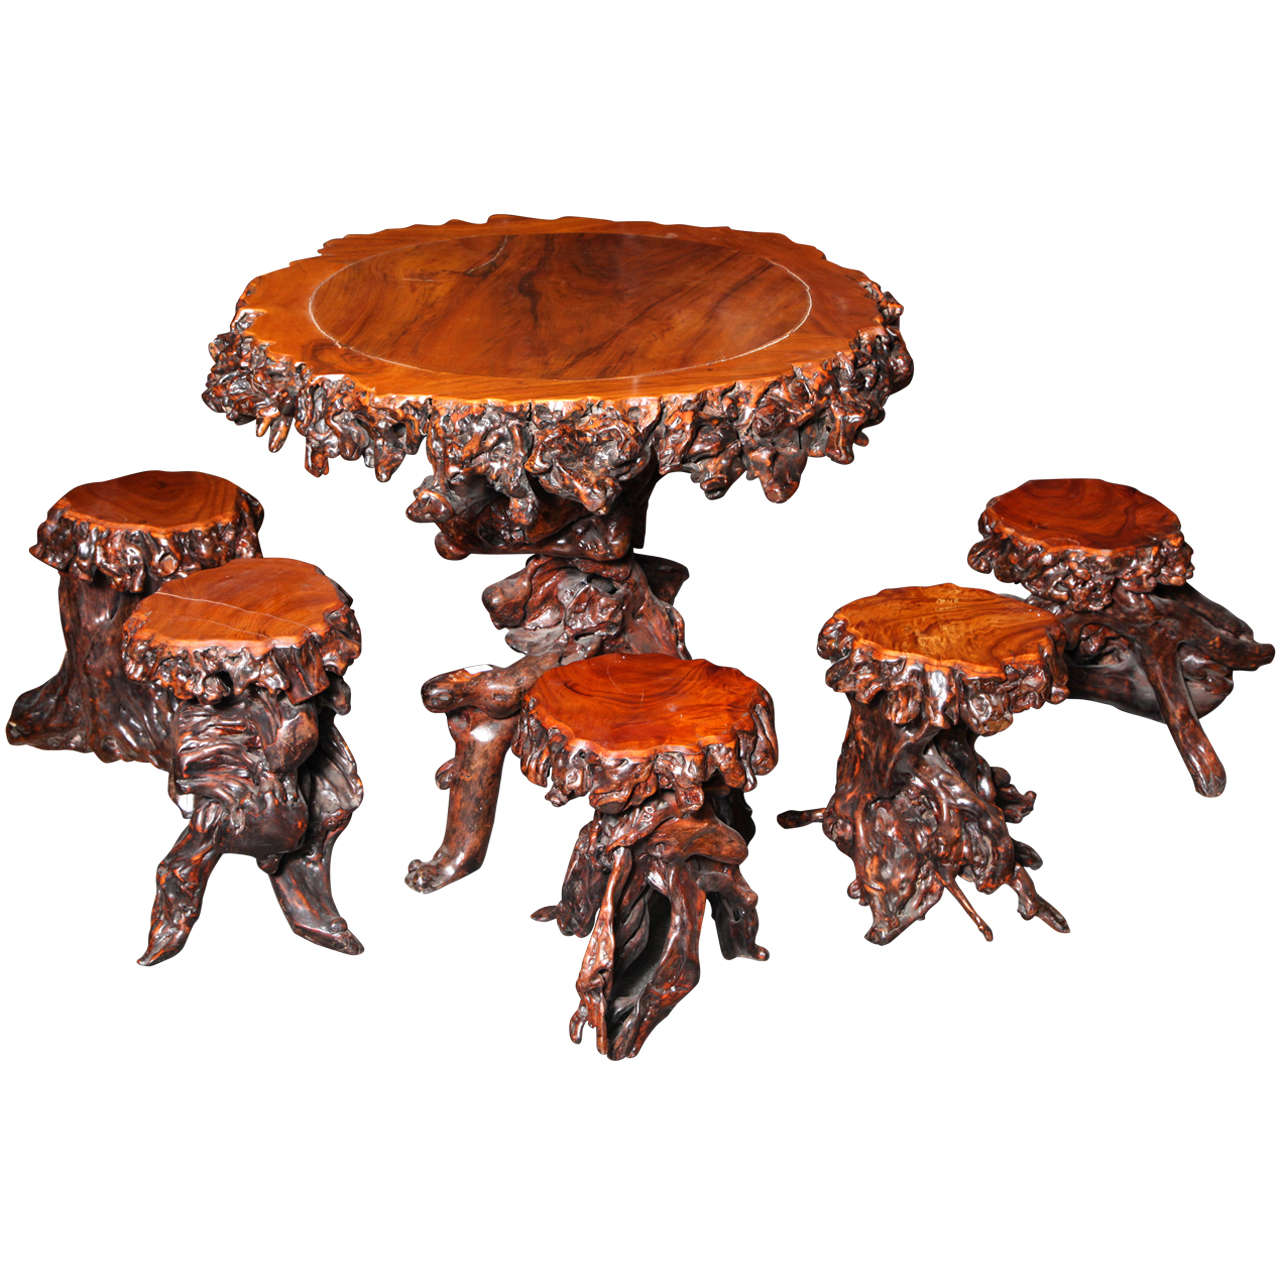 Vintage Chinese Unusual Root Table with Seating